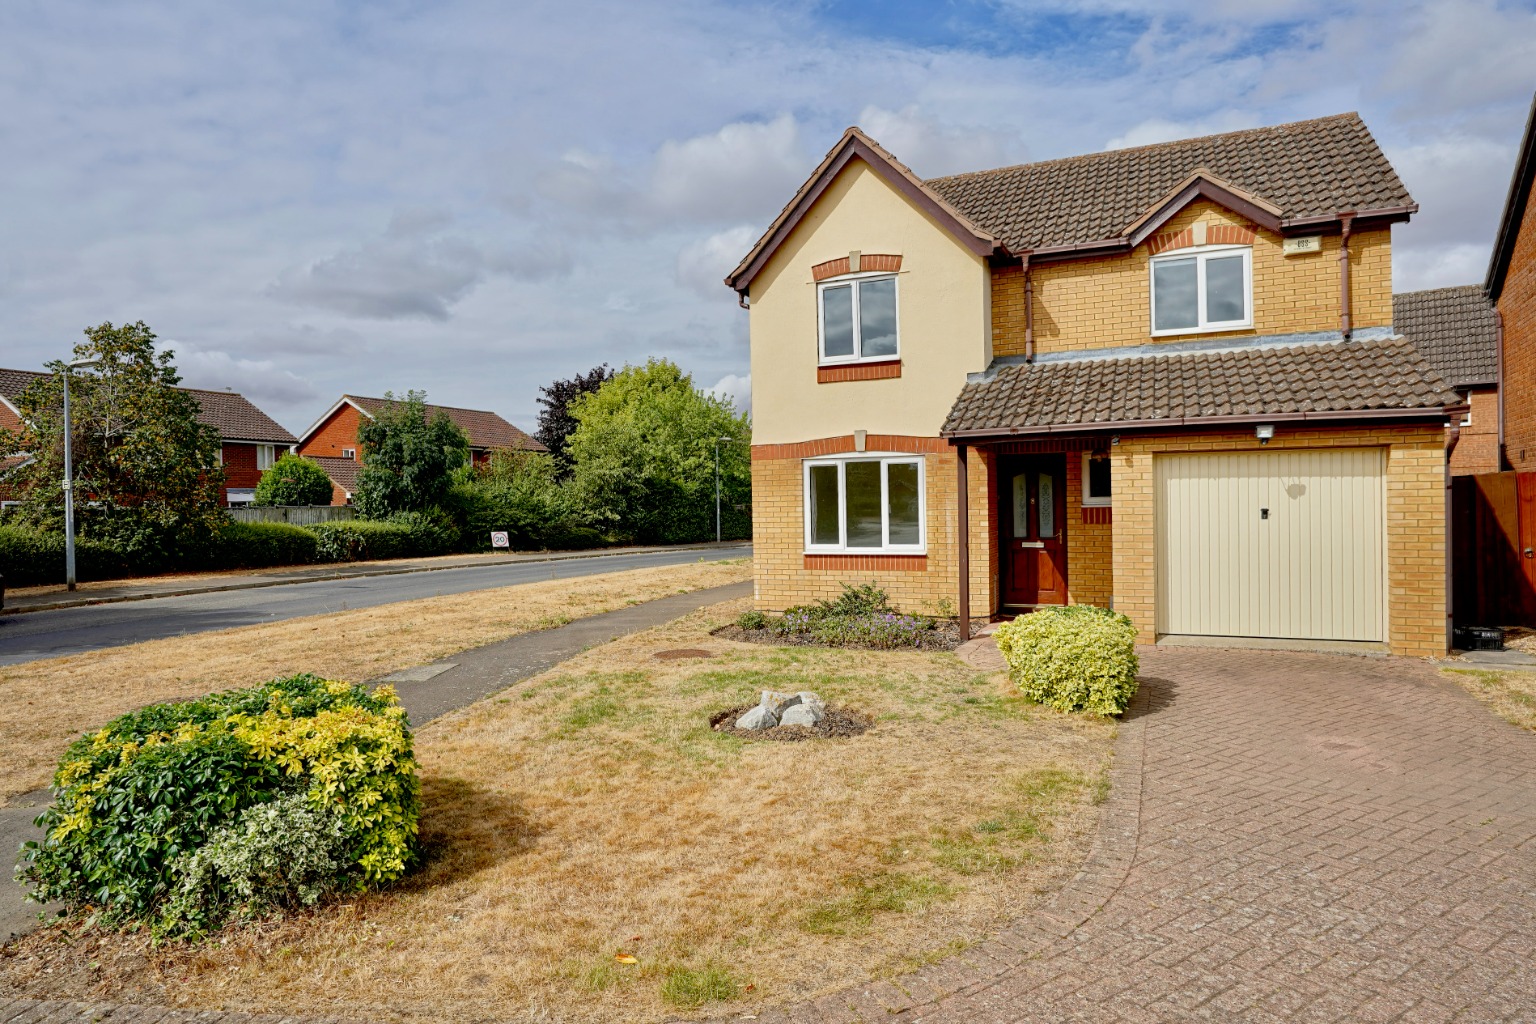 3 bed detached house for sale in Laws Crescent, Huntingdon  - Property Image 1